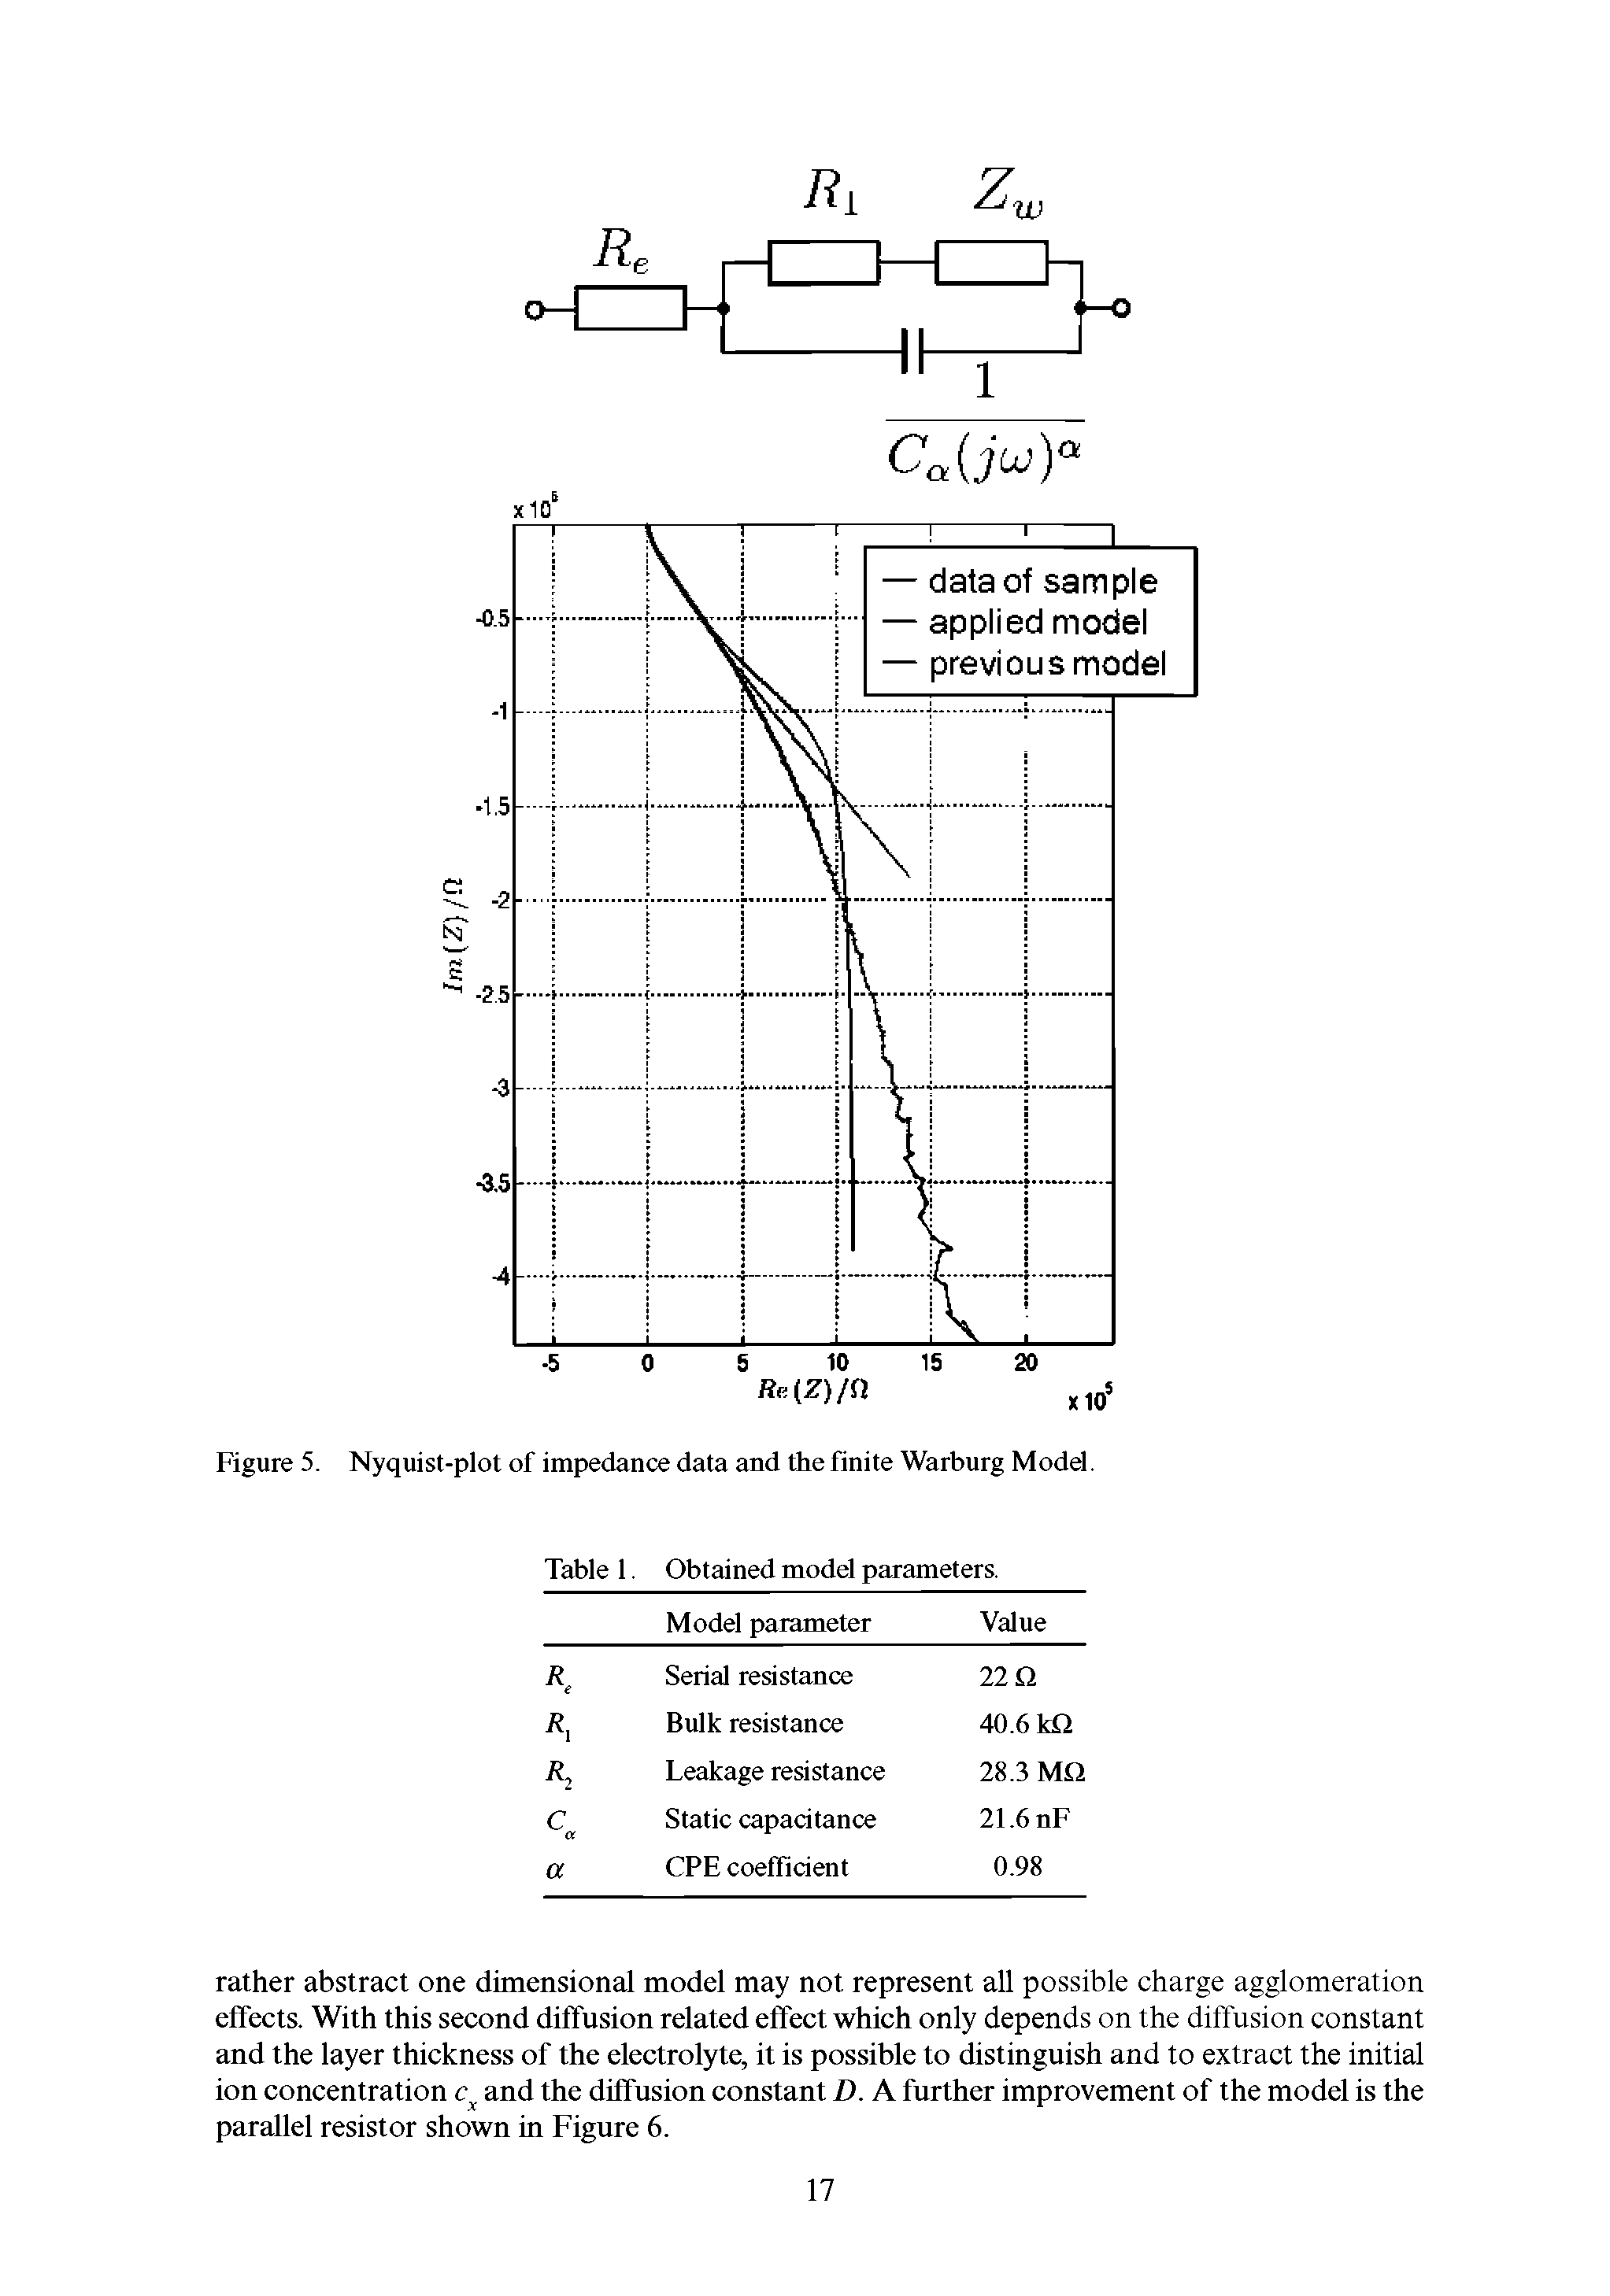 Figure 5. Nyquist-plot of impedance data and the finite Warburg Modd.